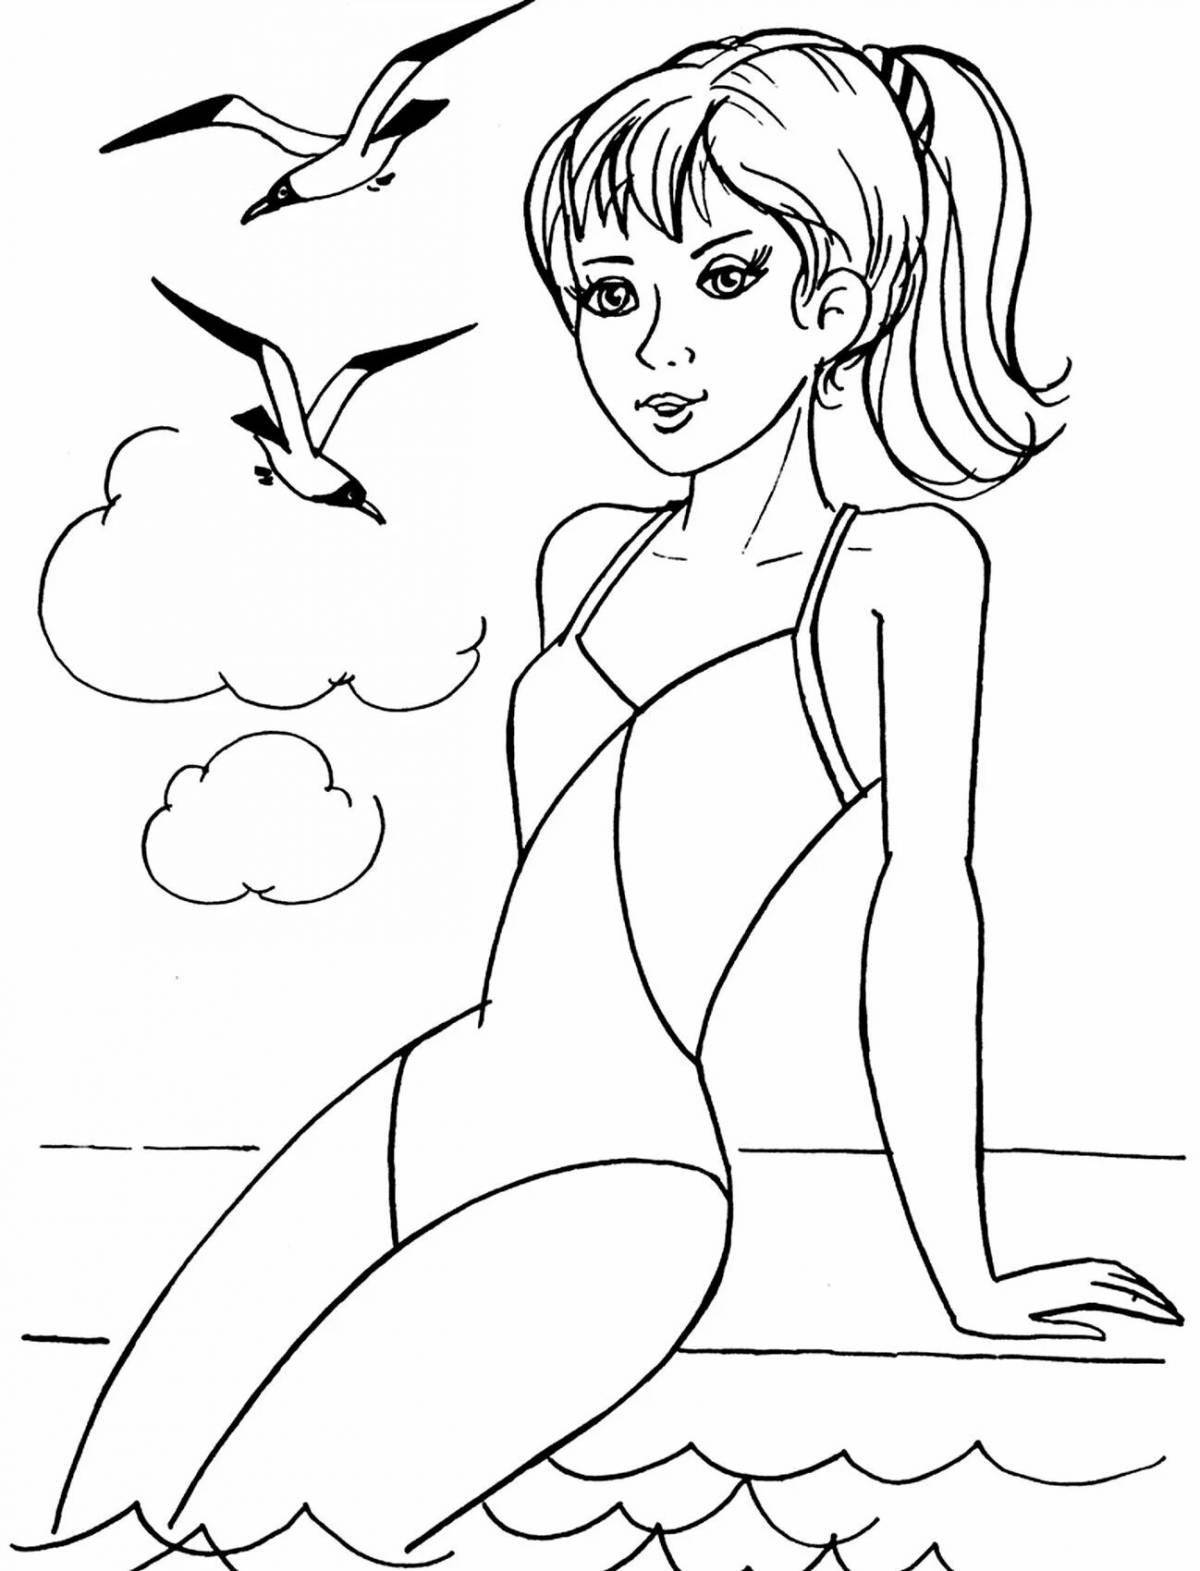 Fairy coloring page 11 for girls